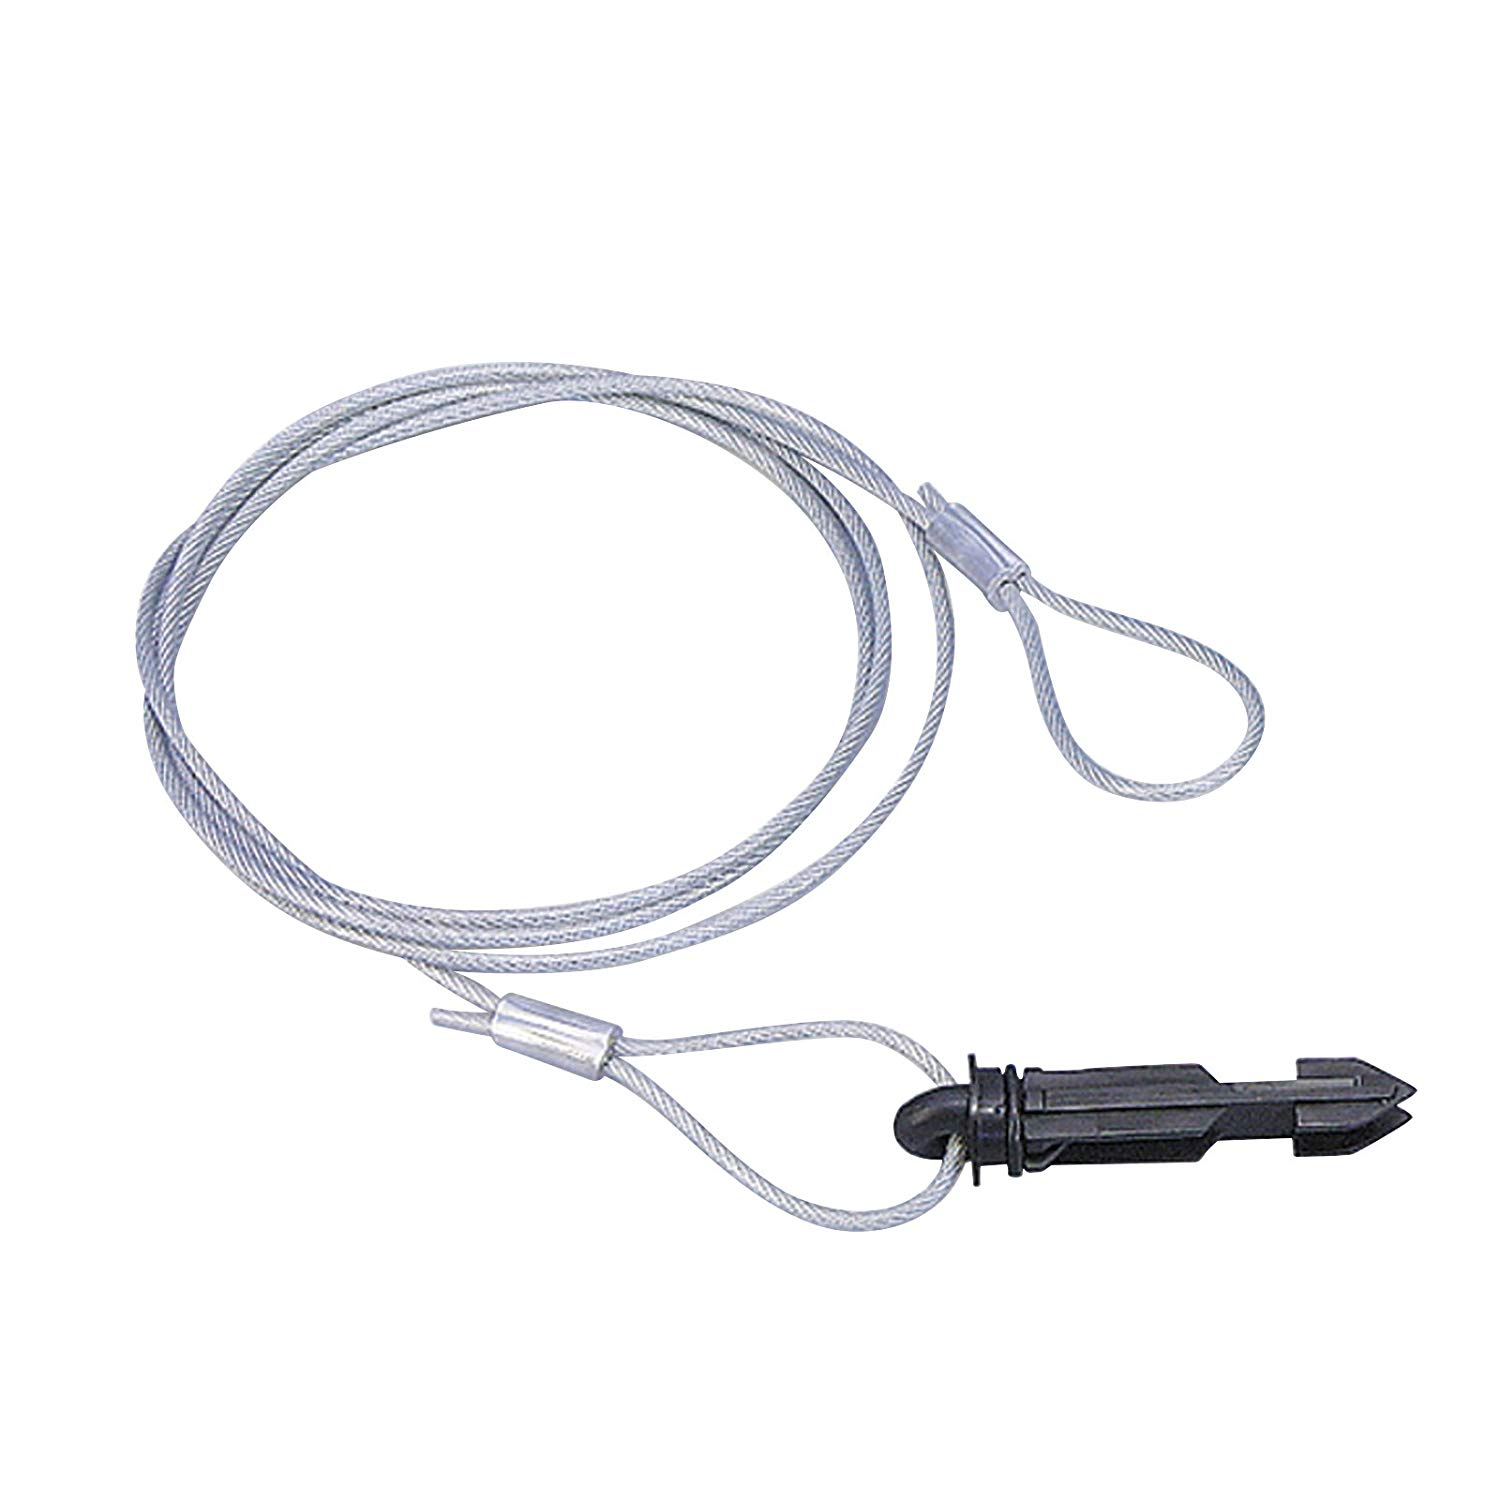 Bargman 54-85-002 Replacement 48 Inch Cable